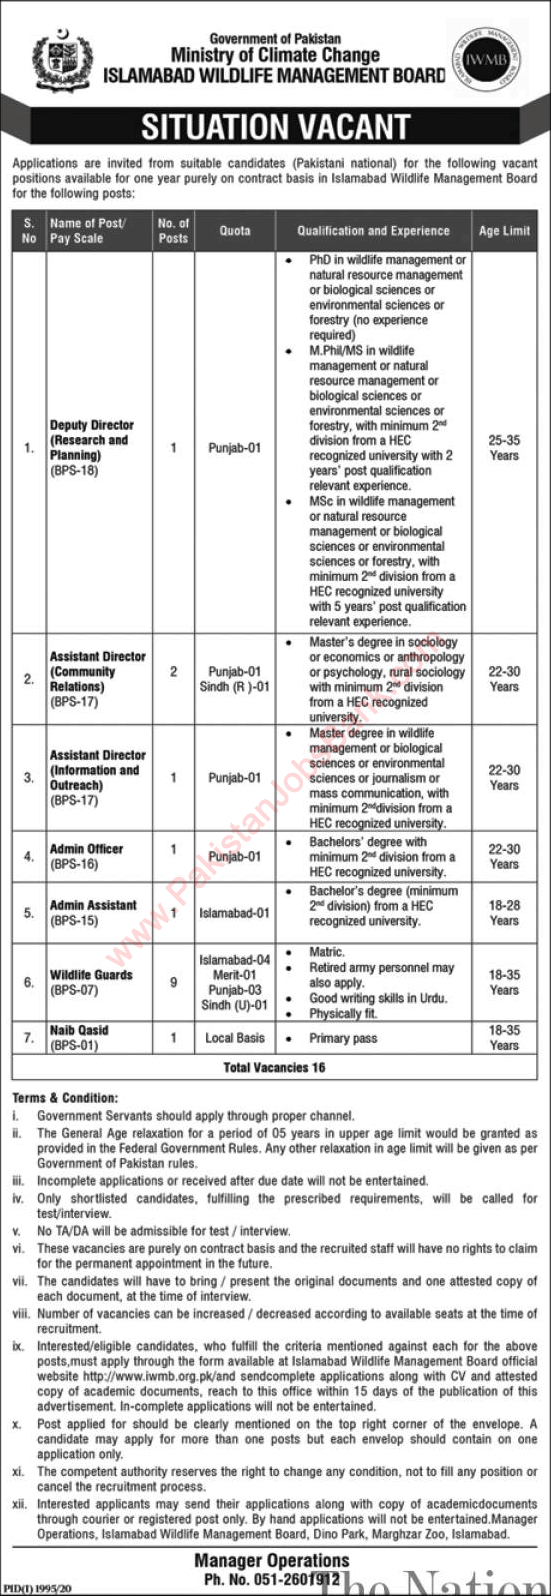 Islamabad Wildlife Management Board Jobs October 2020 IWMB Ministry of Climate Change (MoCC) Latest